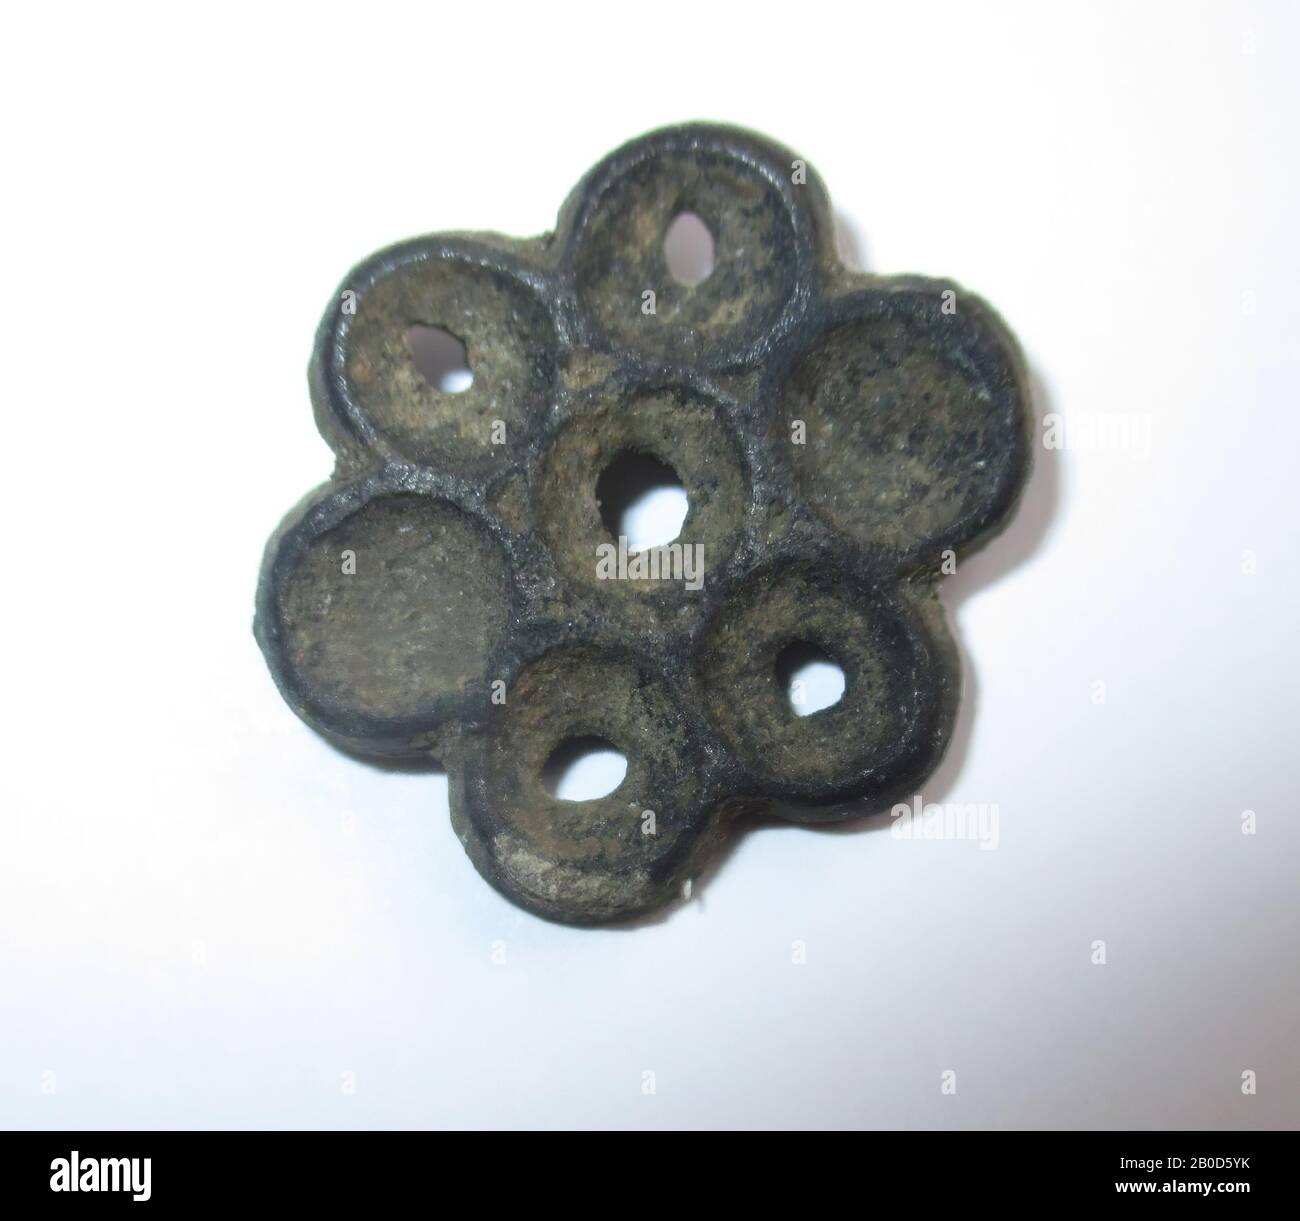 Flower with 5 leaves, interspersed with 5 pointed protrusions. In the middle a tubular hole, the bottom edge of which has been turned over (this was once confirmed by the leather). Diameter is 1.65 cm. Thickness is 4.5 mm., Belt stroke, metal, lead Stock Photo